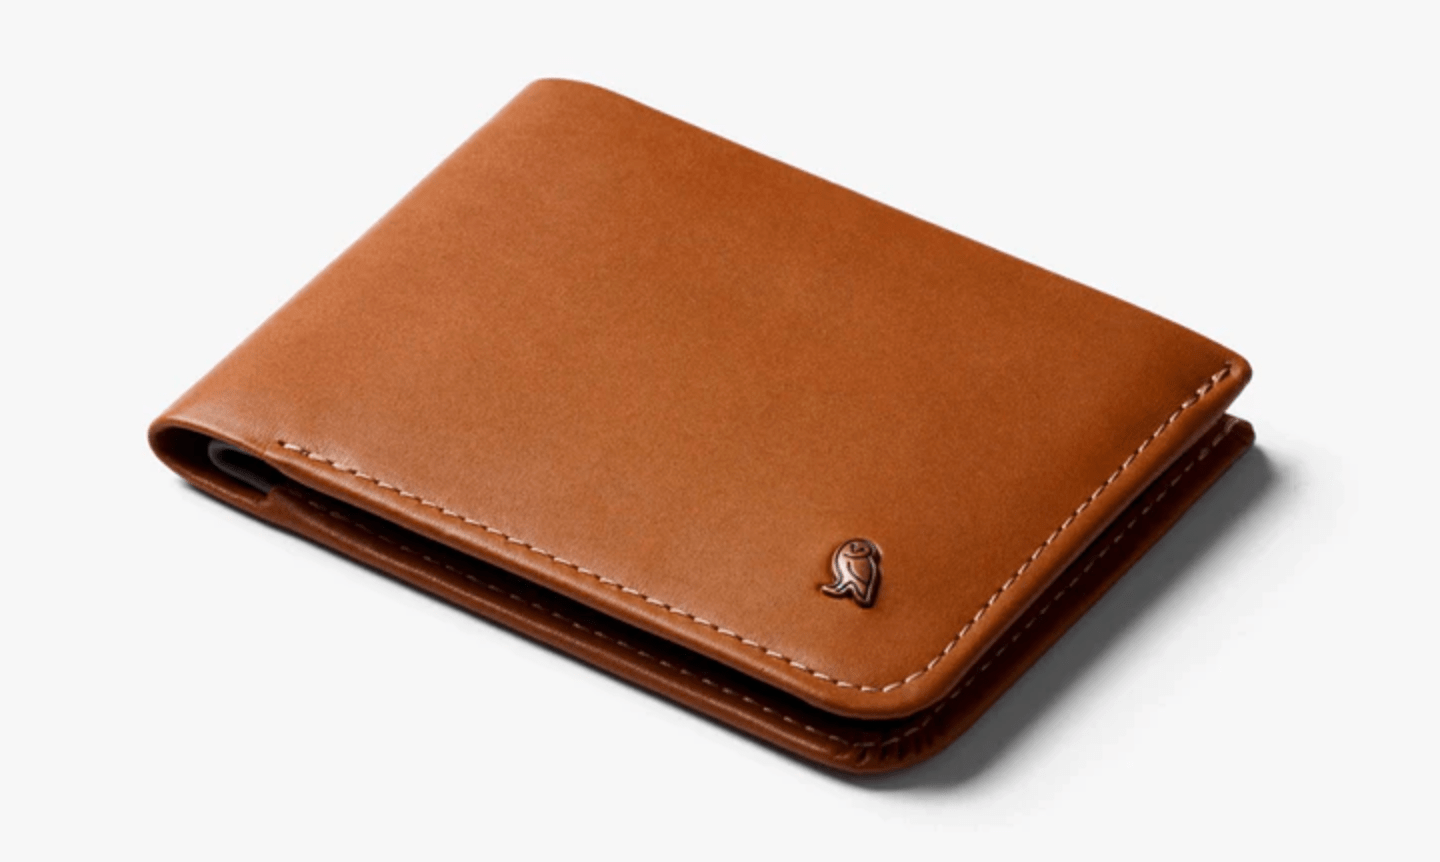 Why we love the Bellroy Hide and Seek